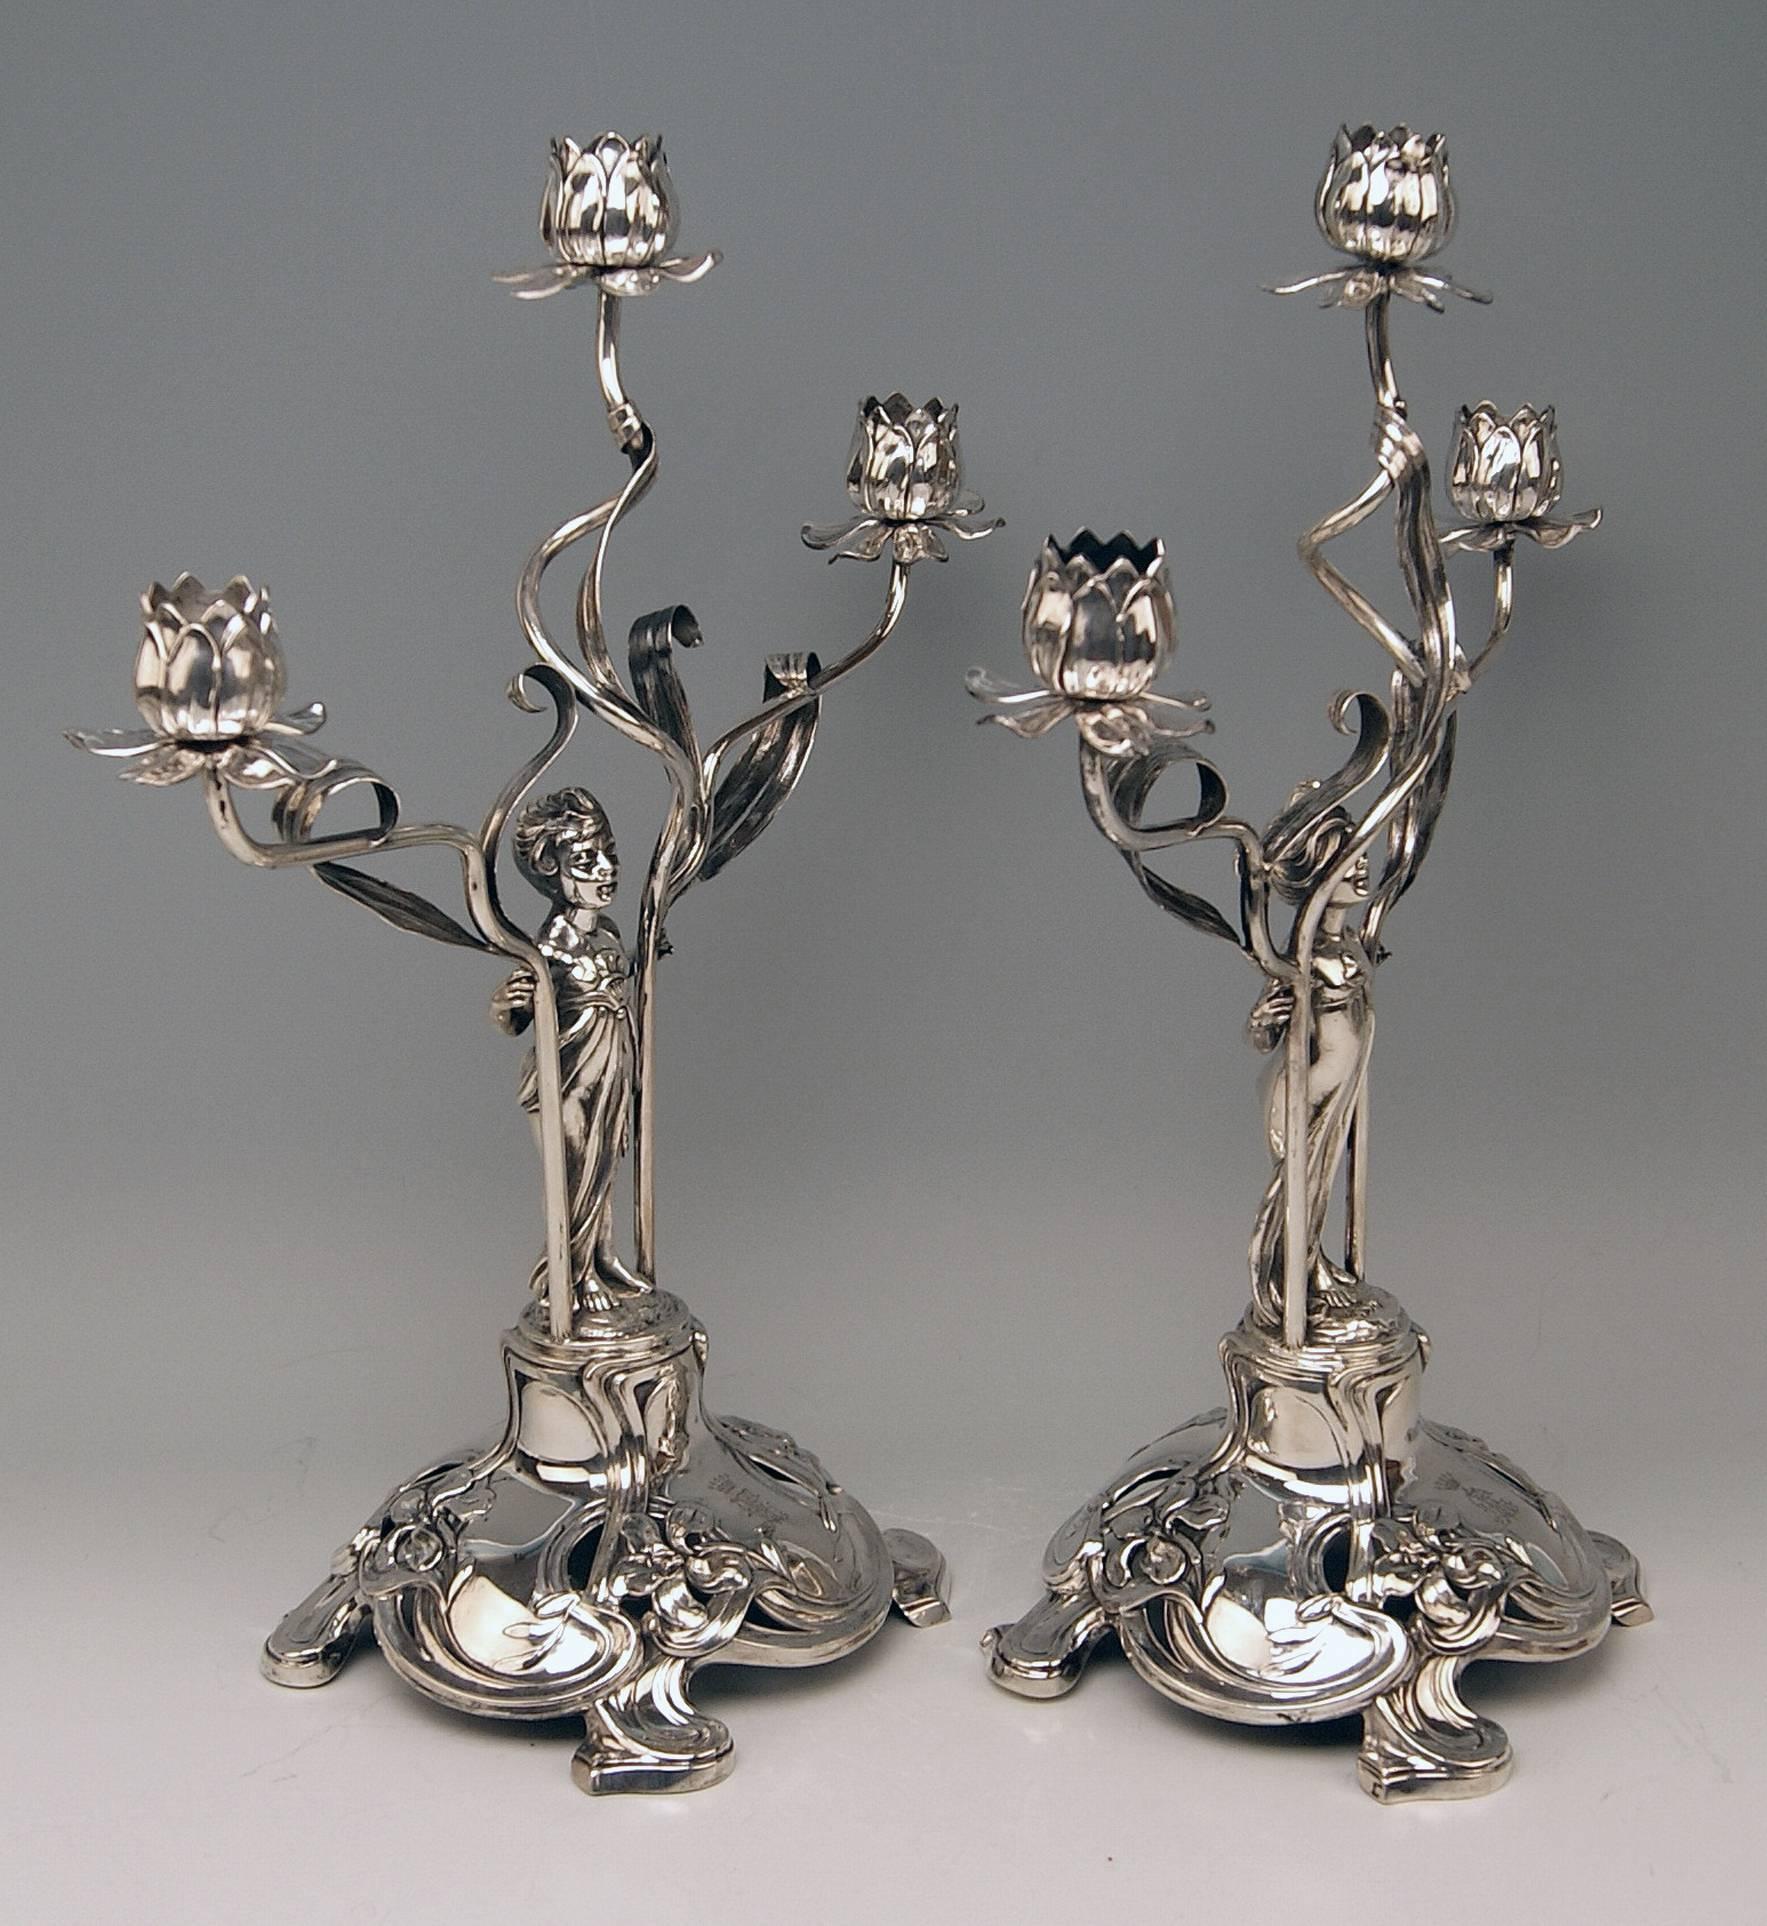 Silver German pair of candlesticks / candleholders, made by Schoellkopf (Pforzheim / Germany).

Art Nouveau (made circa 1900)
Silver 800
branded by German Crescent with Crown
Prague silver import sign of 1872-1902 existing, too
Manufactory: